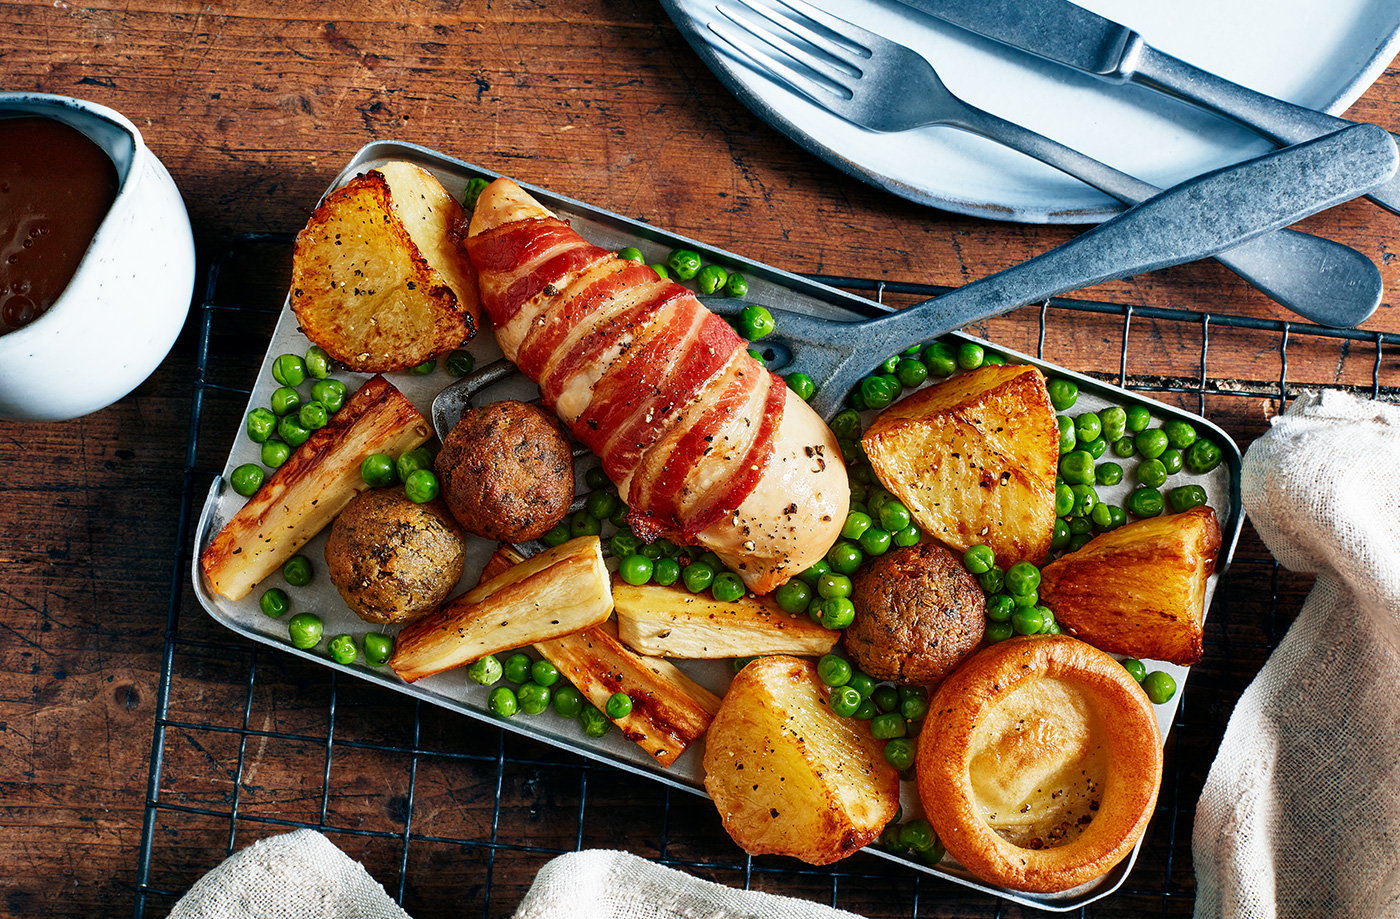 What Should I Order For Dinner Tonight? One-tray roast dinner